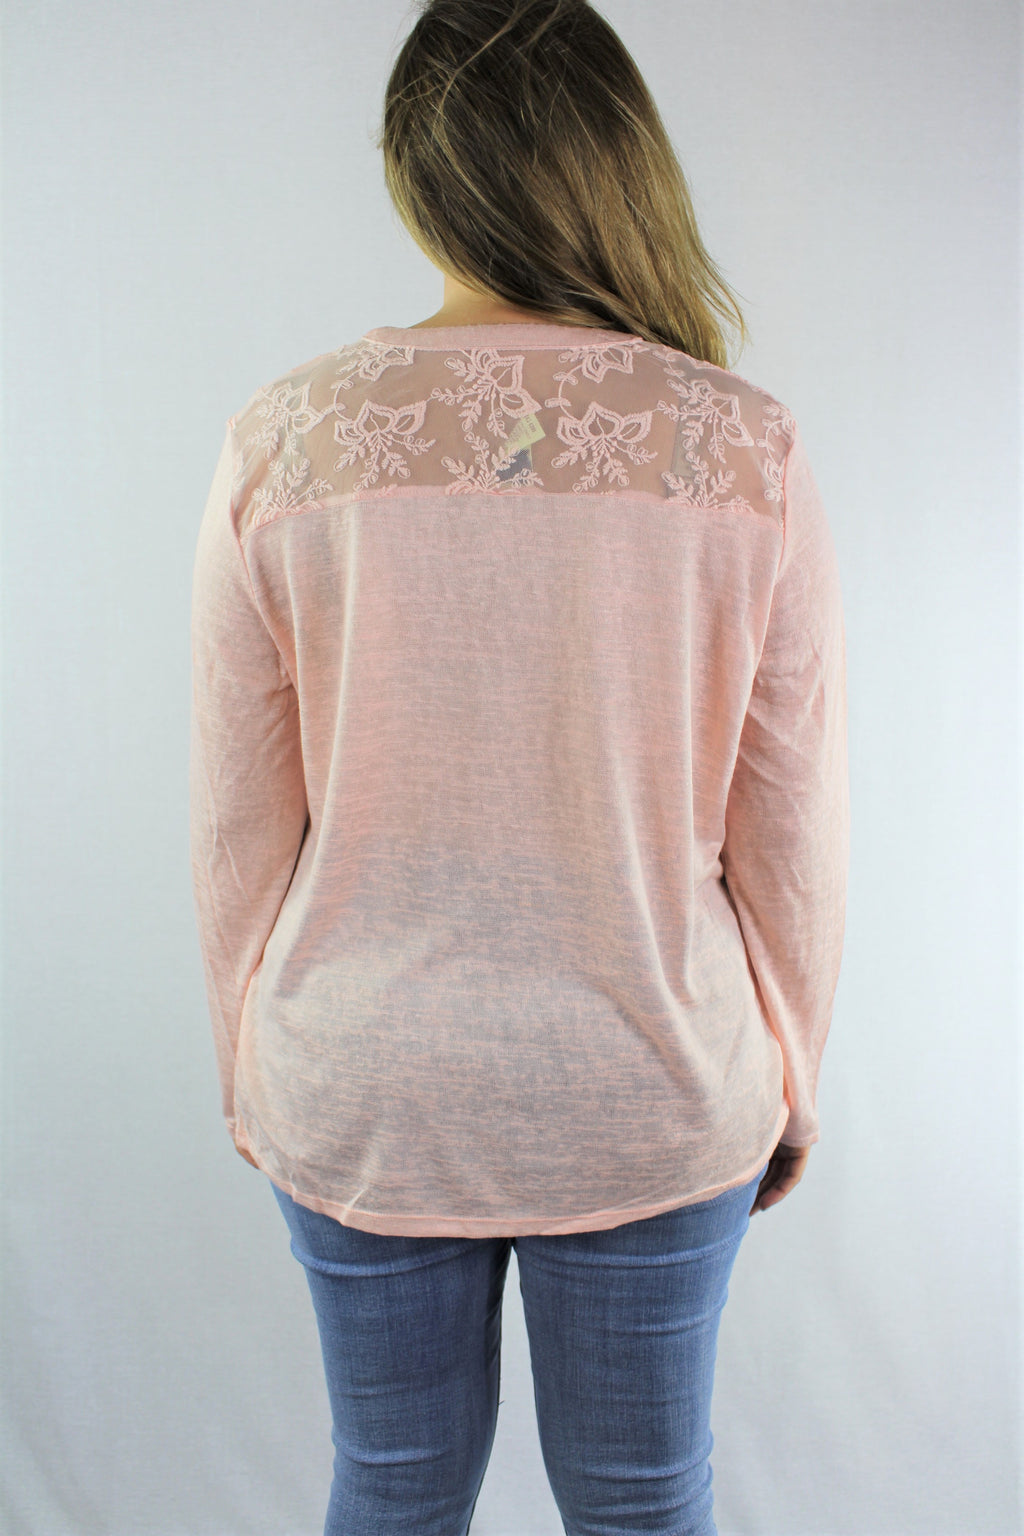 Plus Size Long Sleeve Top with Lace Detail ***